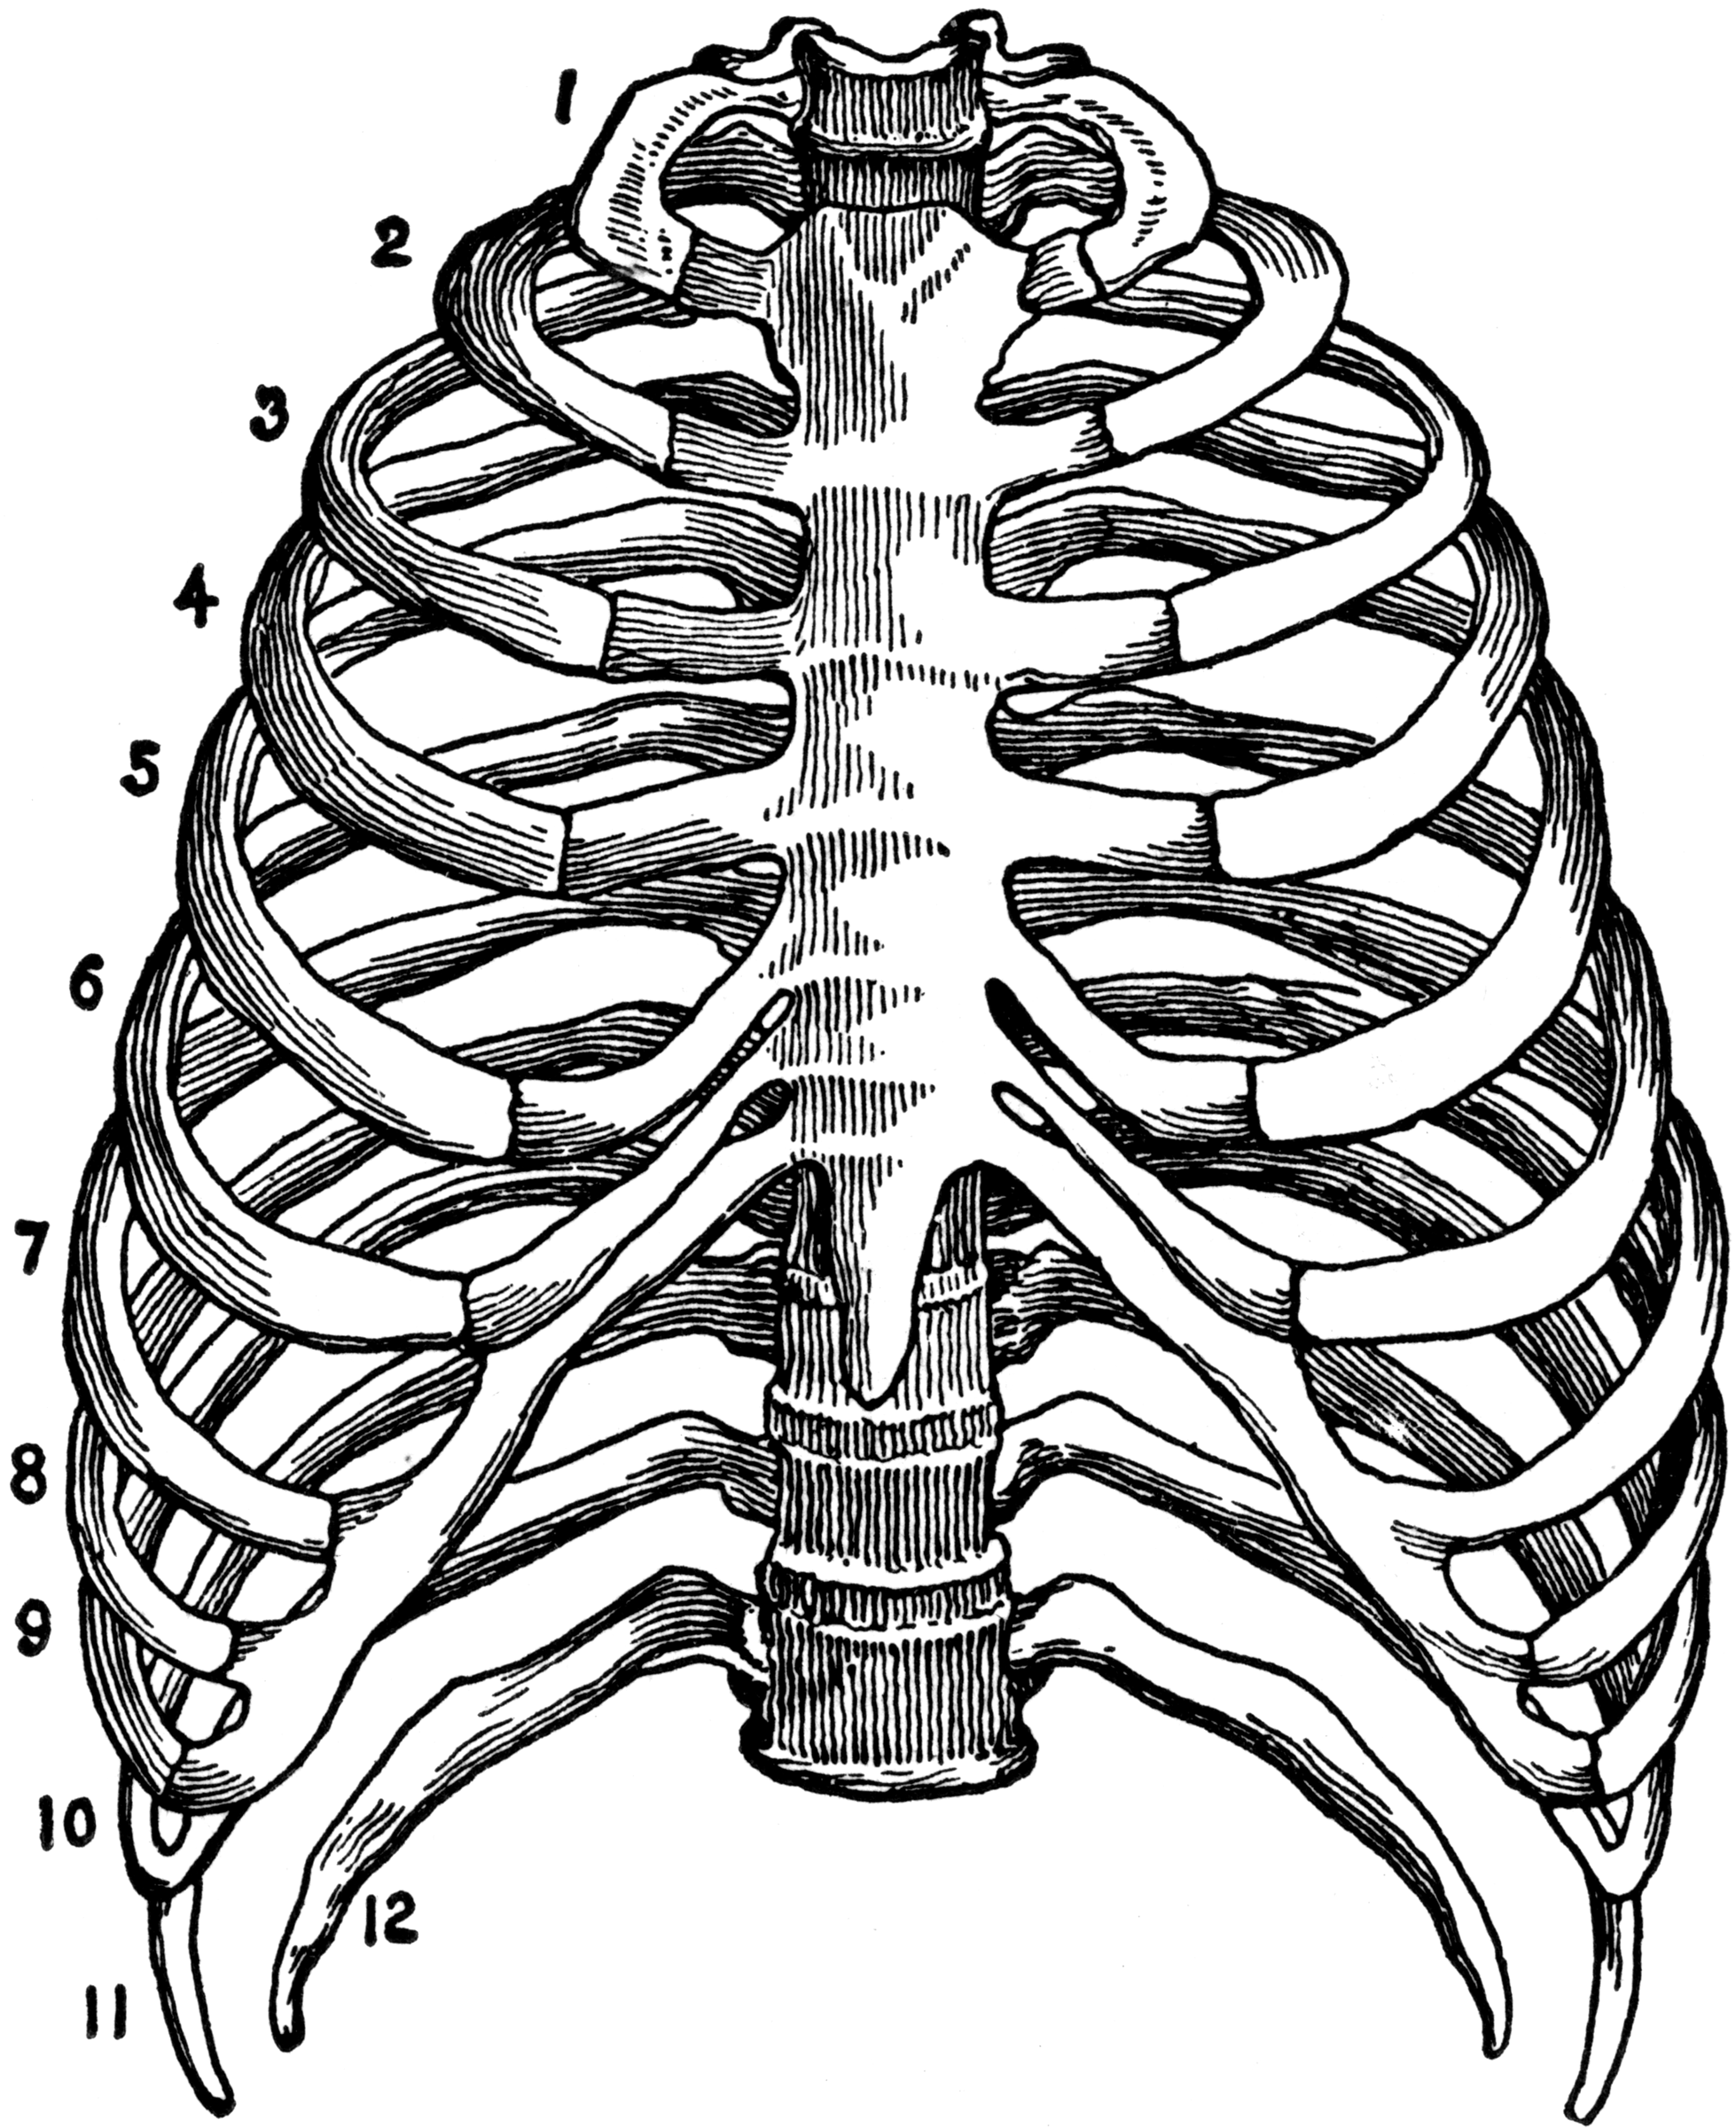 Skeleton of the Thorax | ClipArt ETC